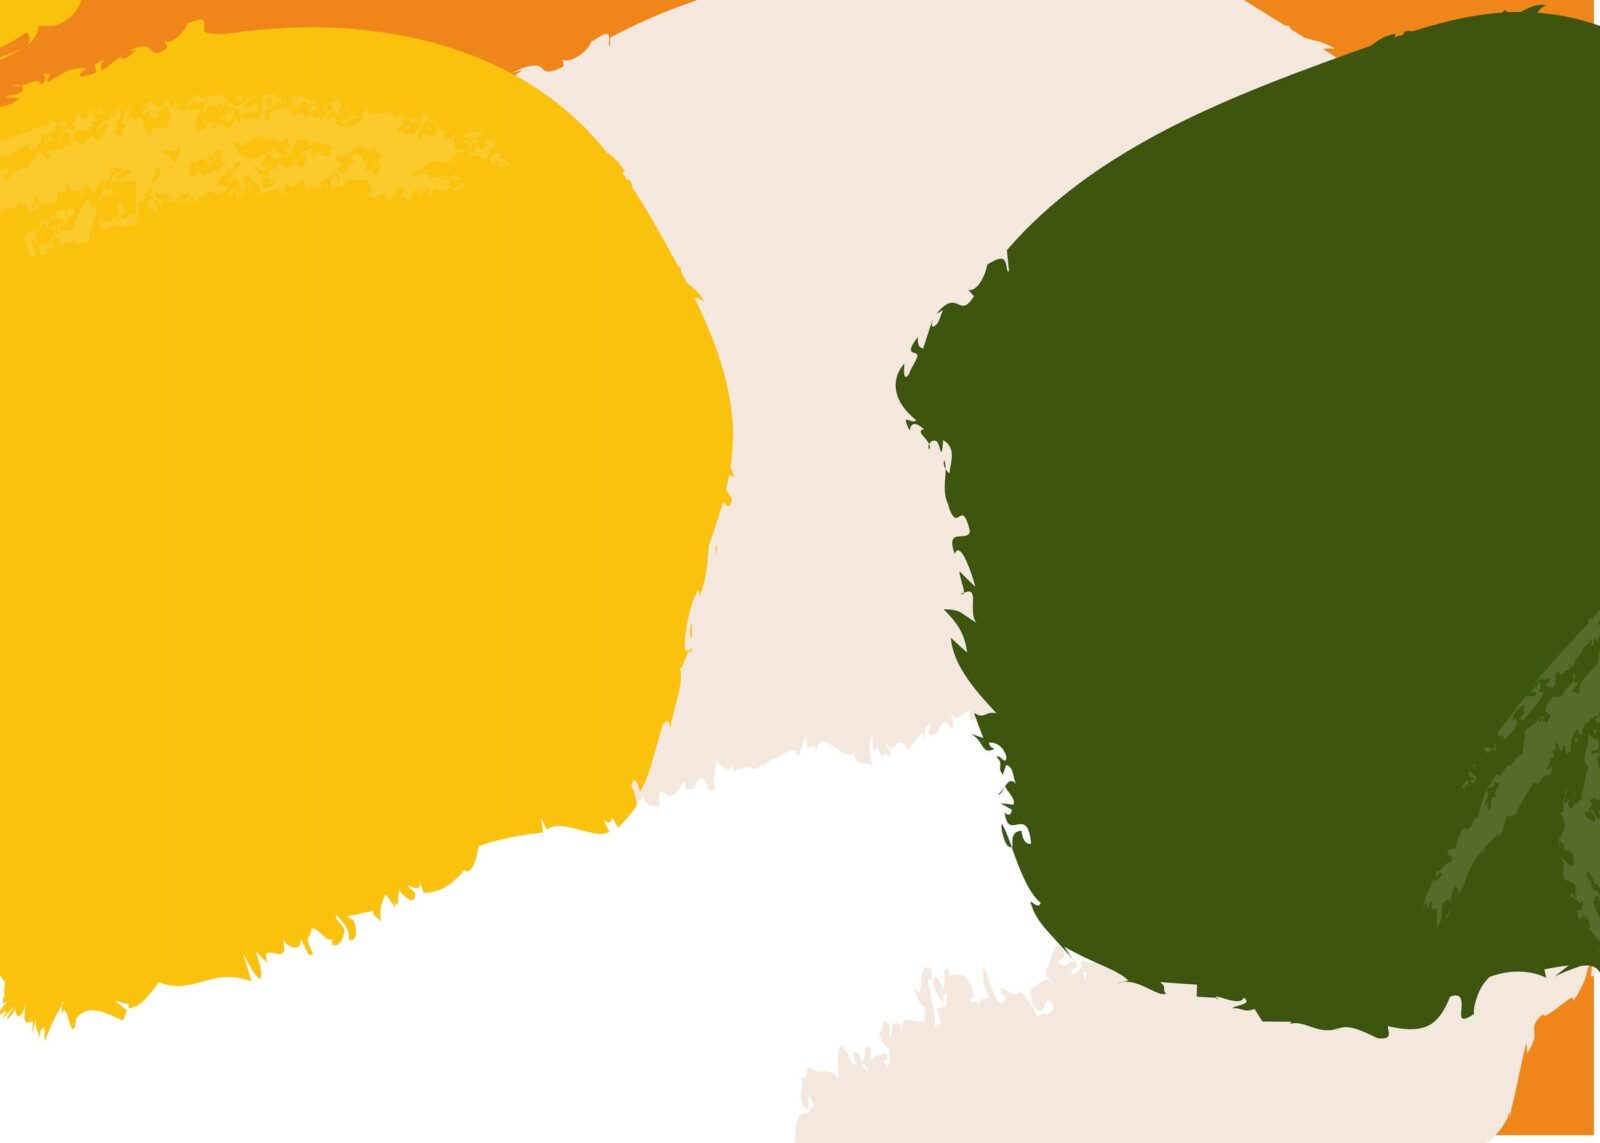 An abstract design of bright yellow, dark green, white, and orange shapes against a pale peach background.